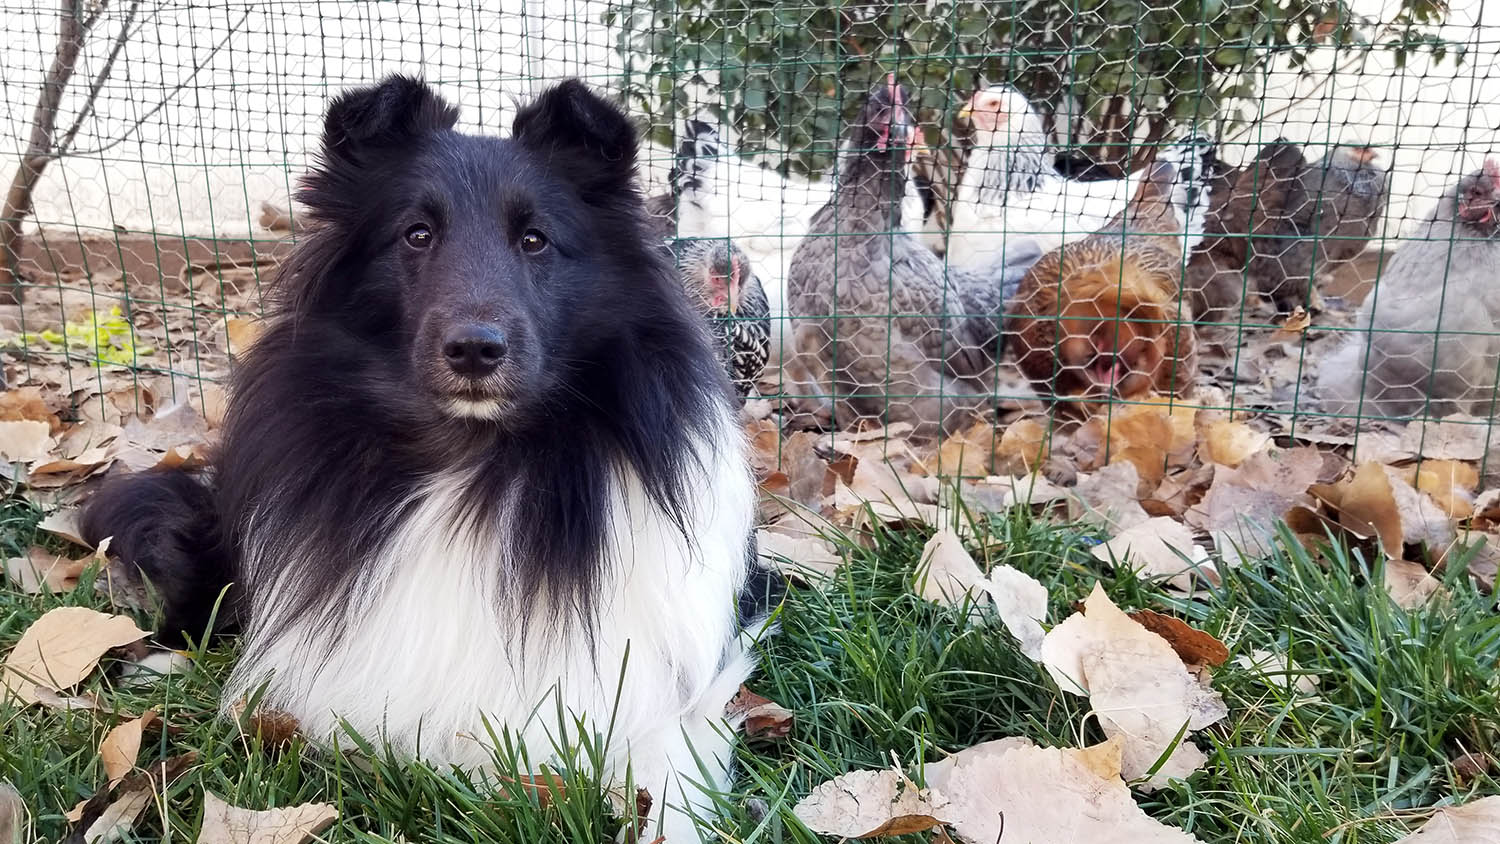 A cute black and white dog sitting in front of a fence with chickens visible in the background